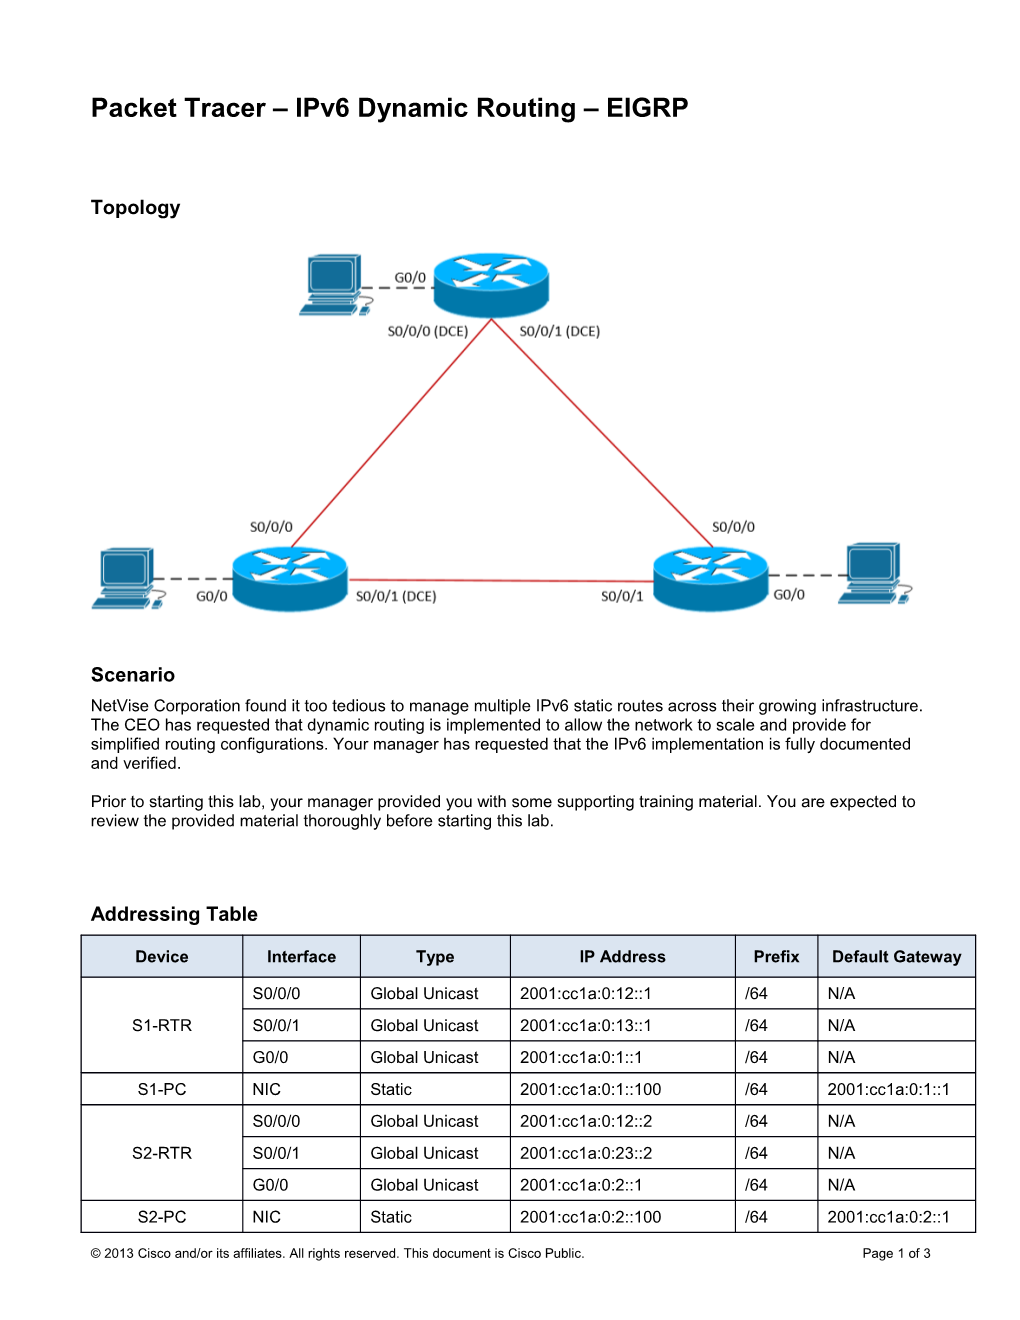 Packet Tracer Ipv6 Dynamic Routing EIGRP